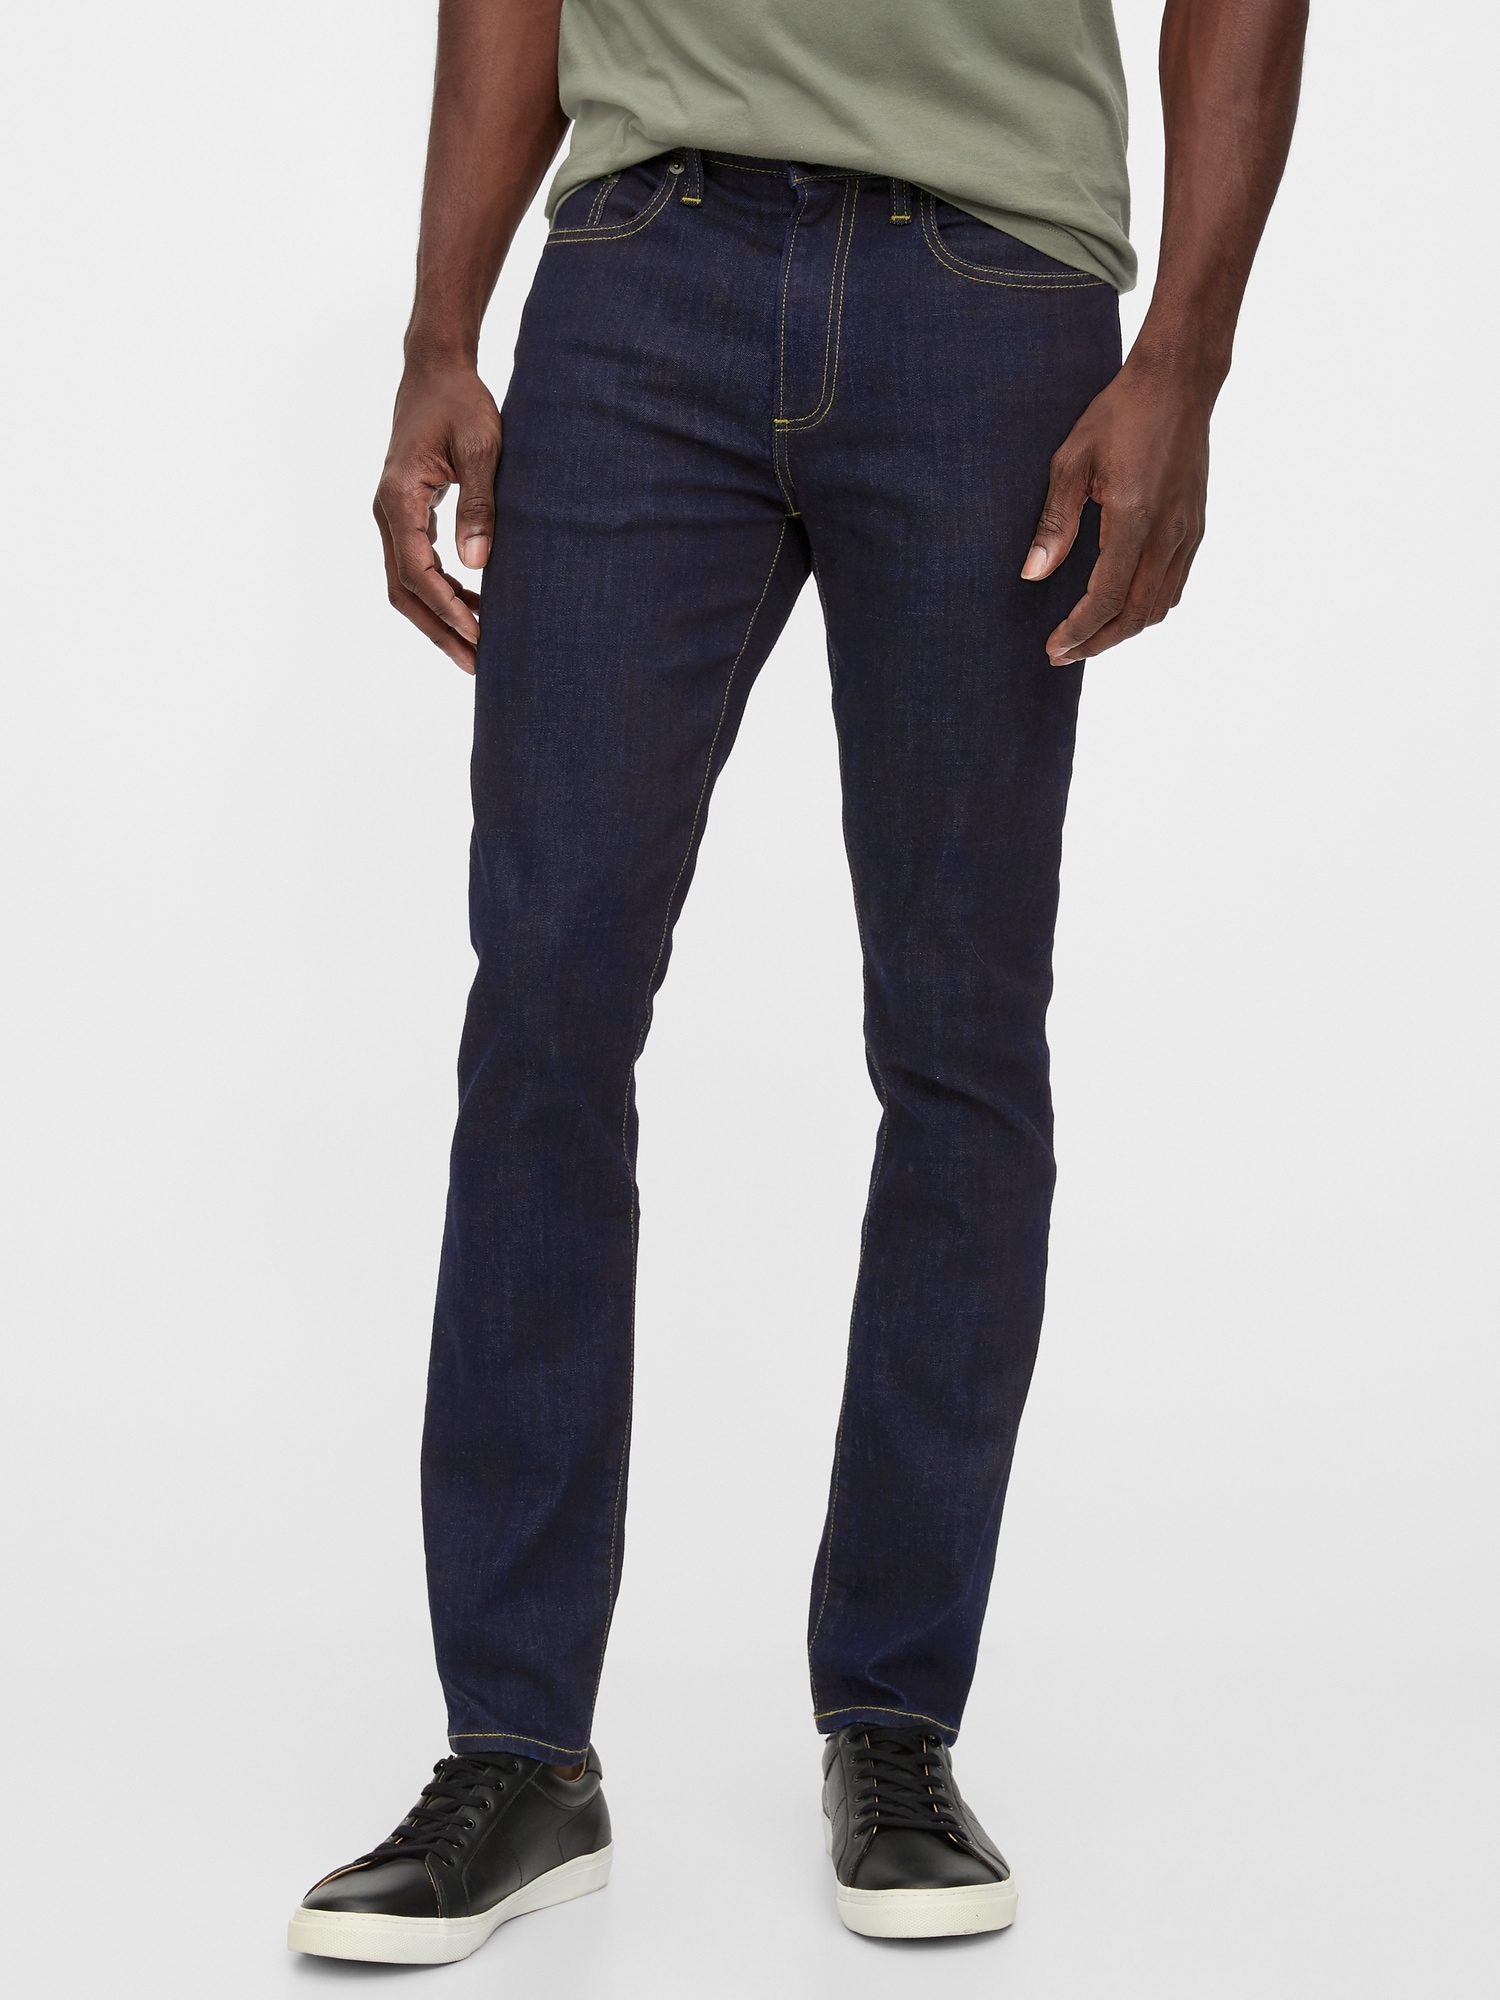 Soft Wear Skinny Jeans With Washwell™ | Gap Factory